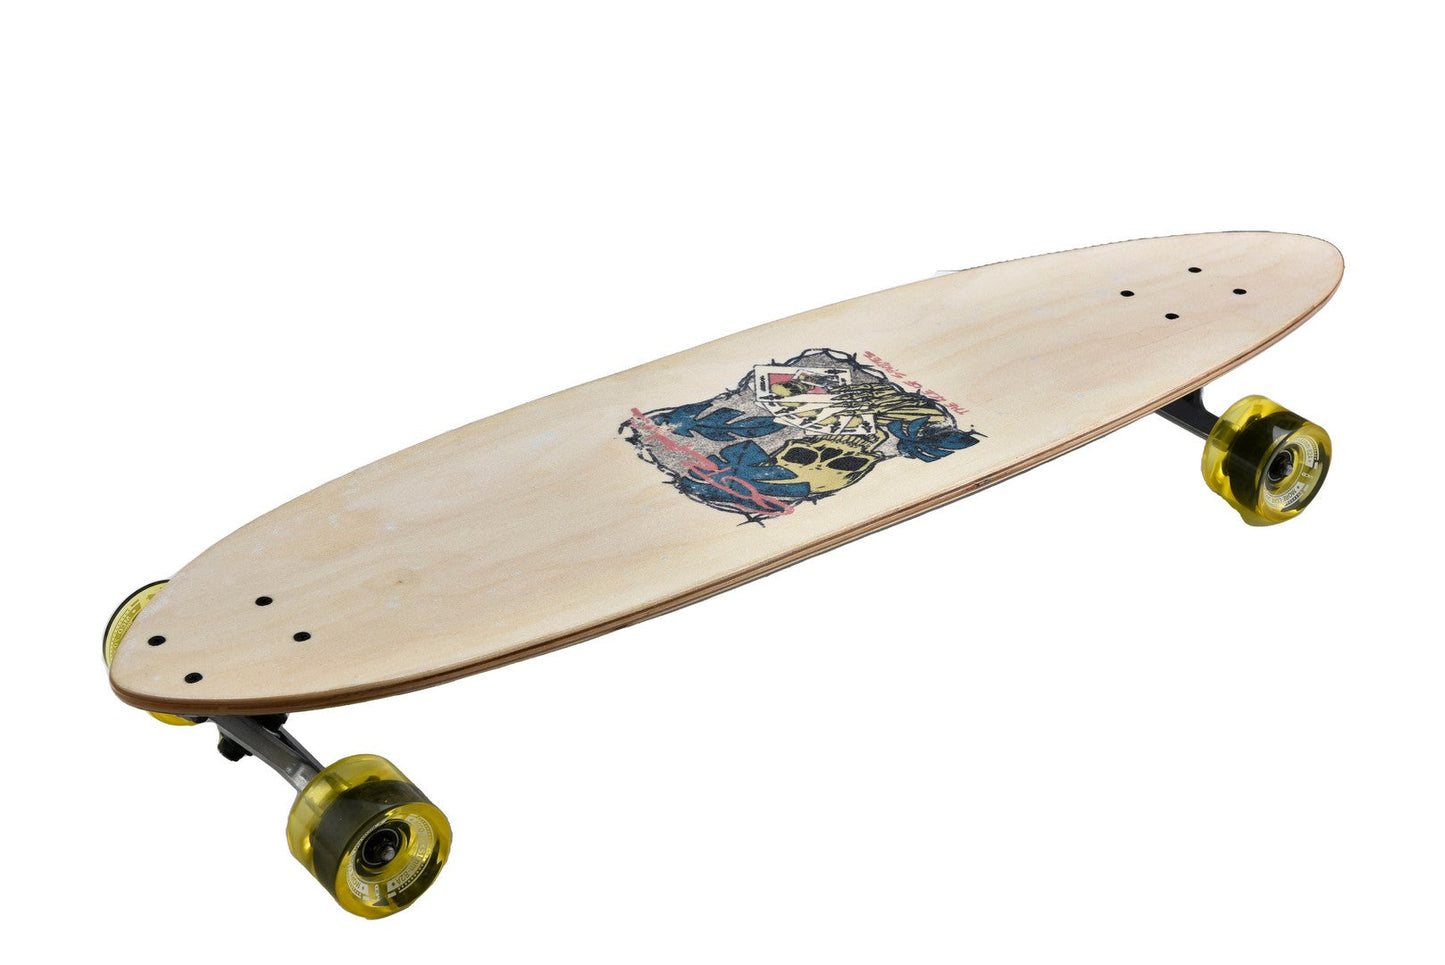 THE DEAL PINTAIL LONGBOARD